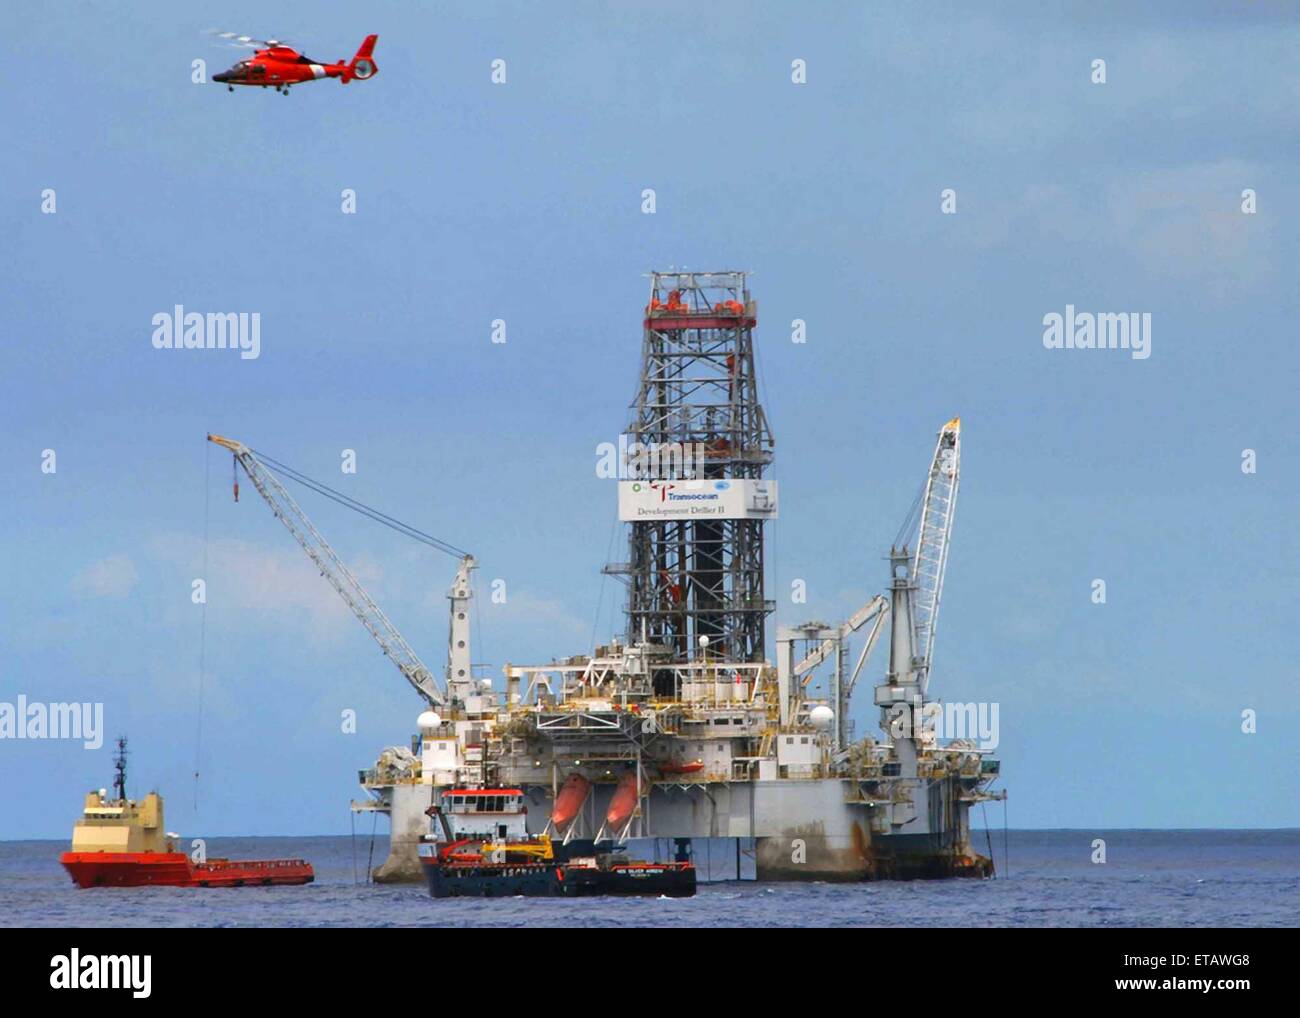 The mobile offshore drilling unit Development Driller II in the process of drilling a relief well at the BP Deepwater Horizon oil spill disaster site July 20, 2010 in the Gulf of Mexico. Stock Photo